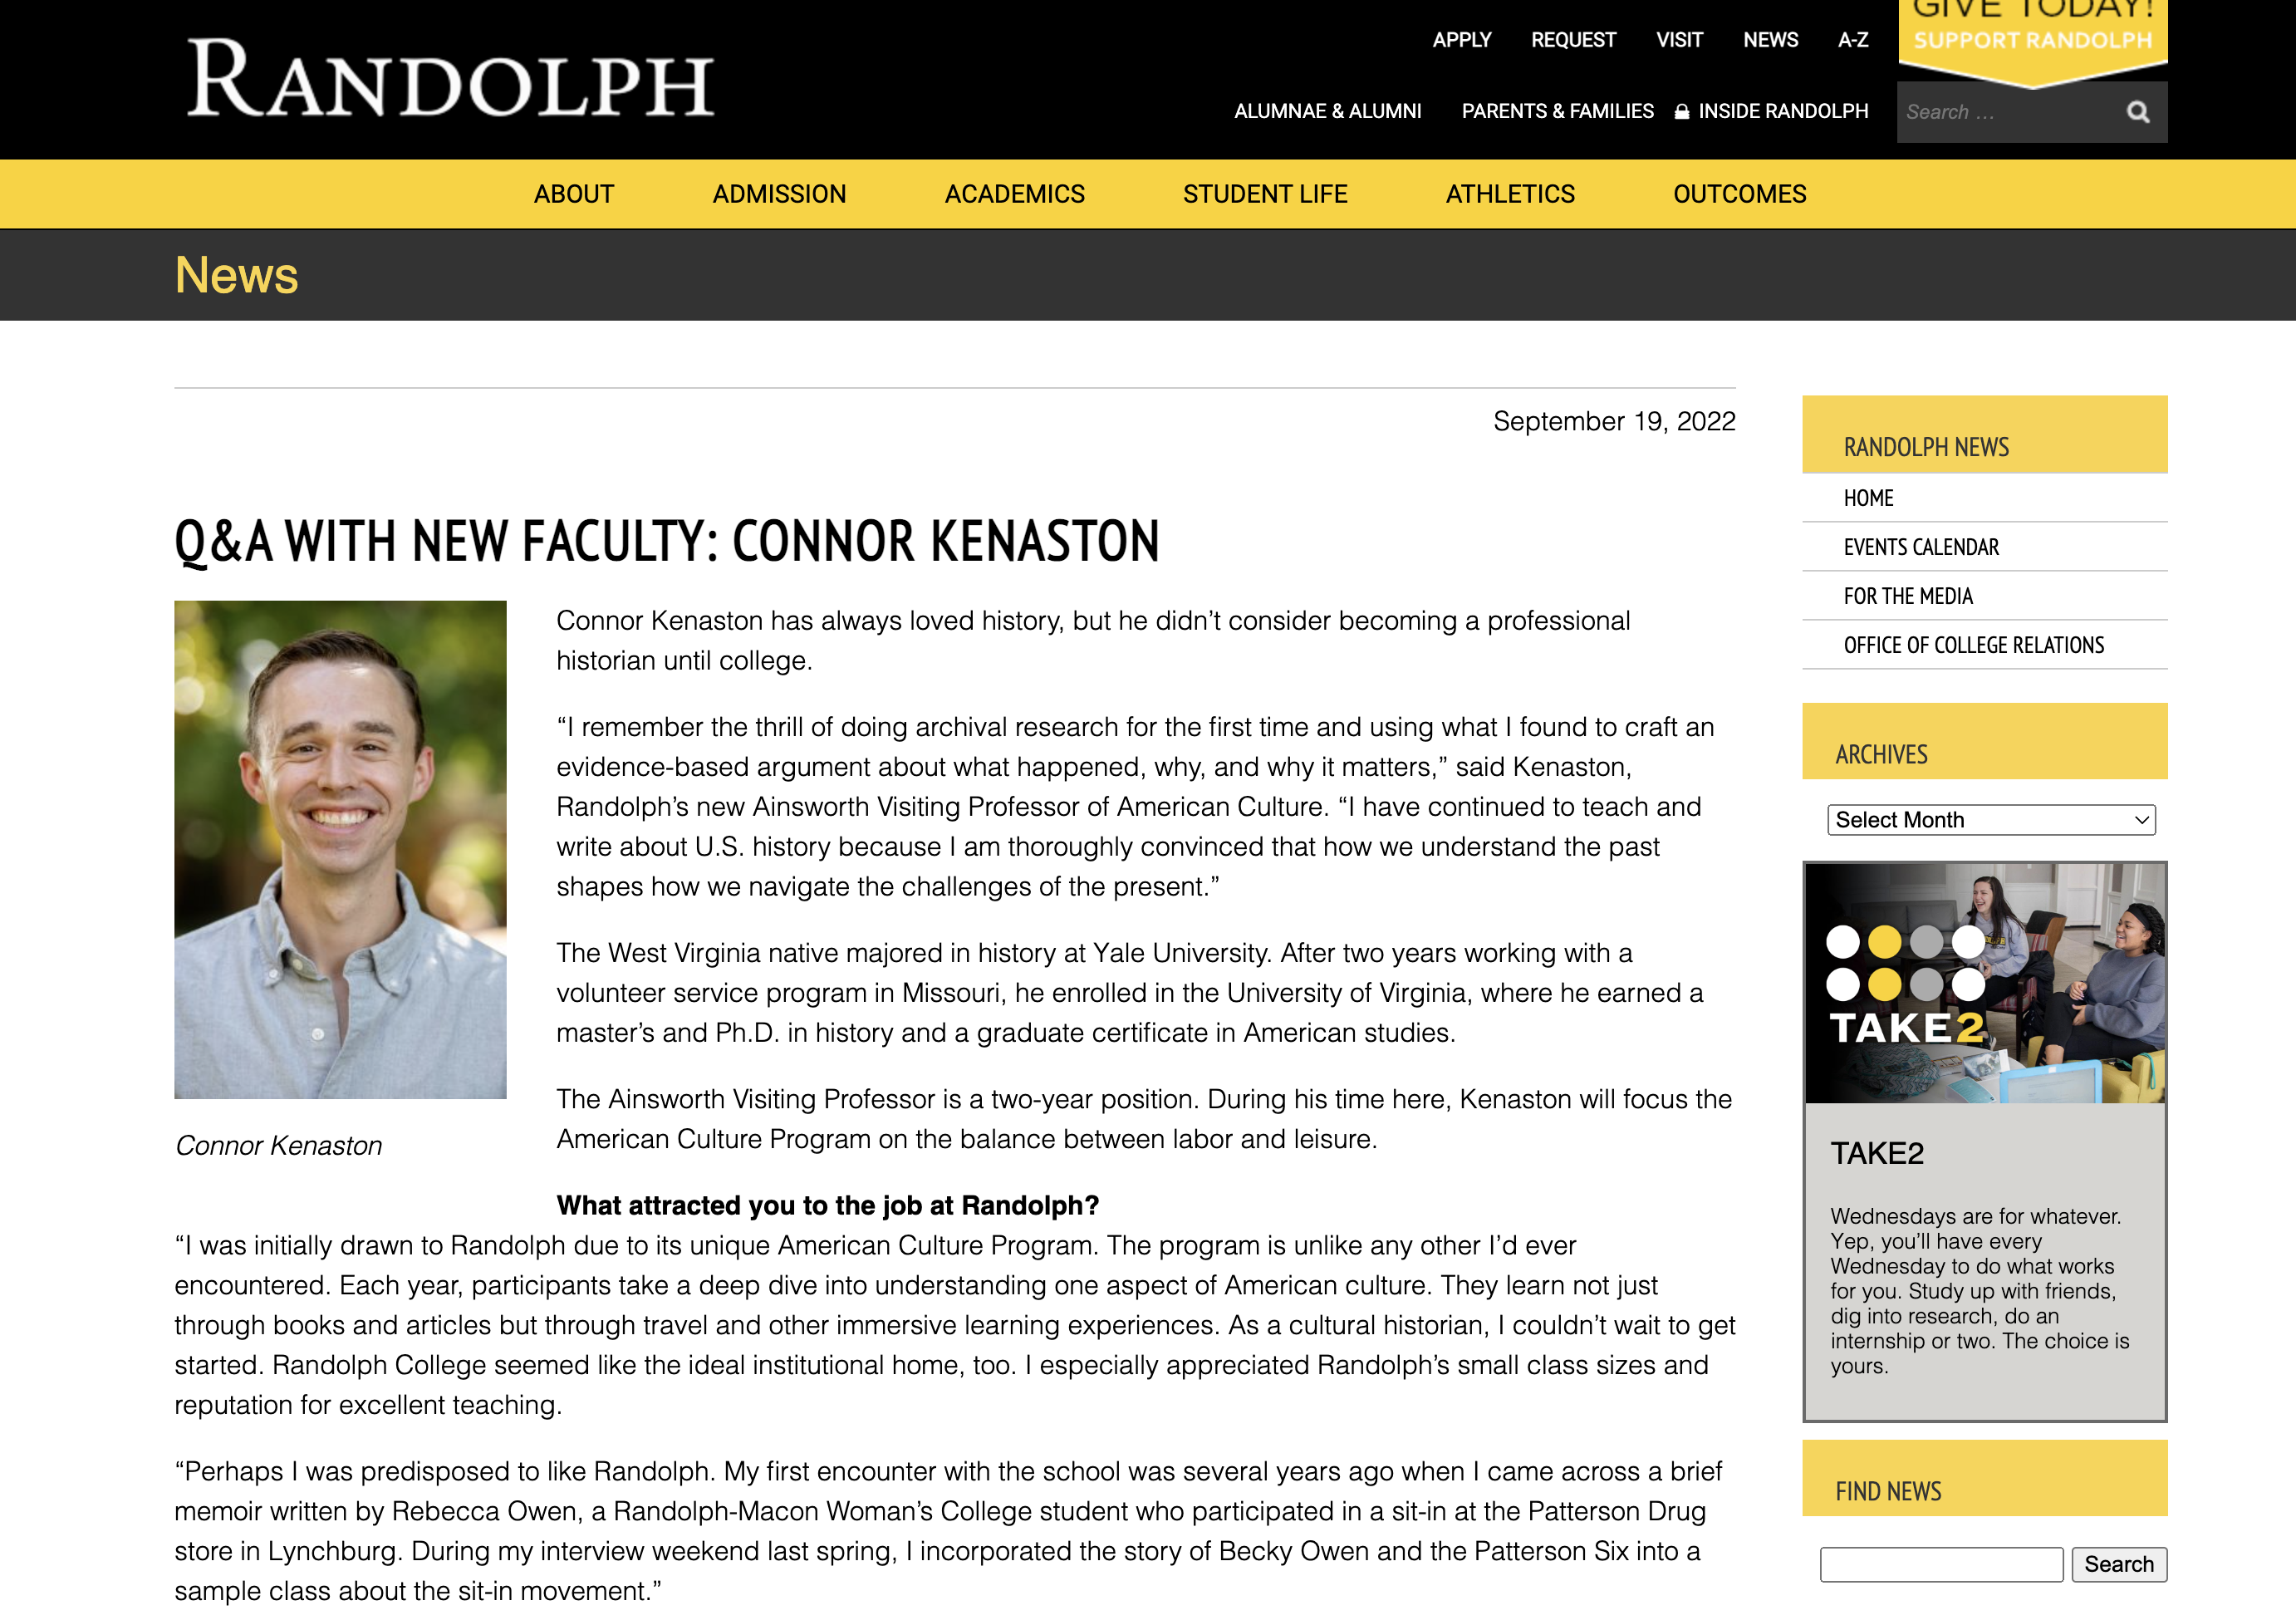 Screenshot of Randolph College's Q&A with Connor S. Kenaston, the new Ainsworth Visiting Assistant Professor of American Culture